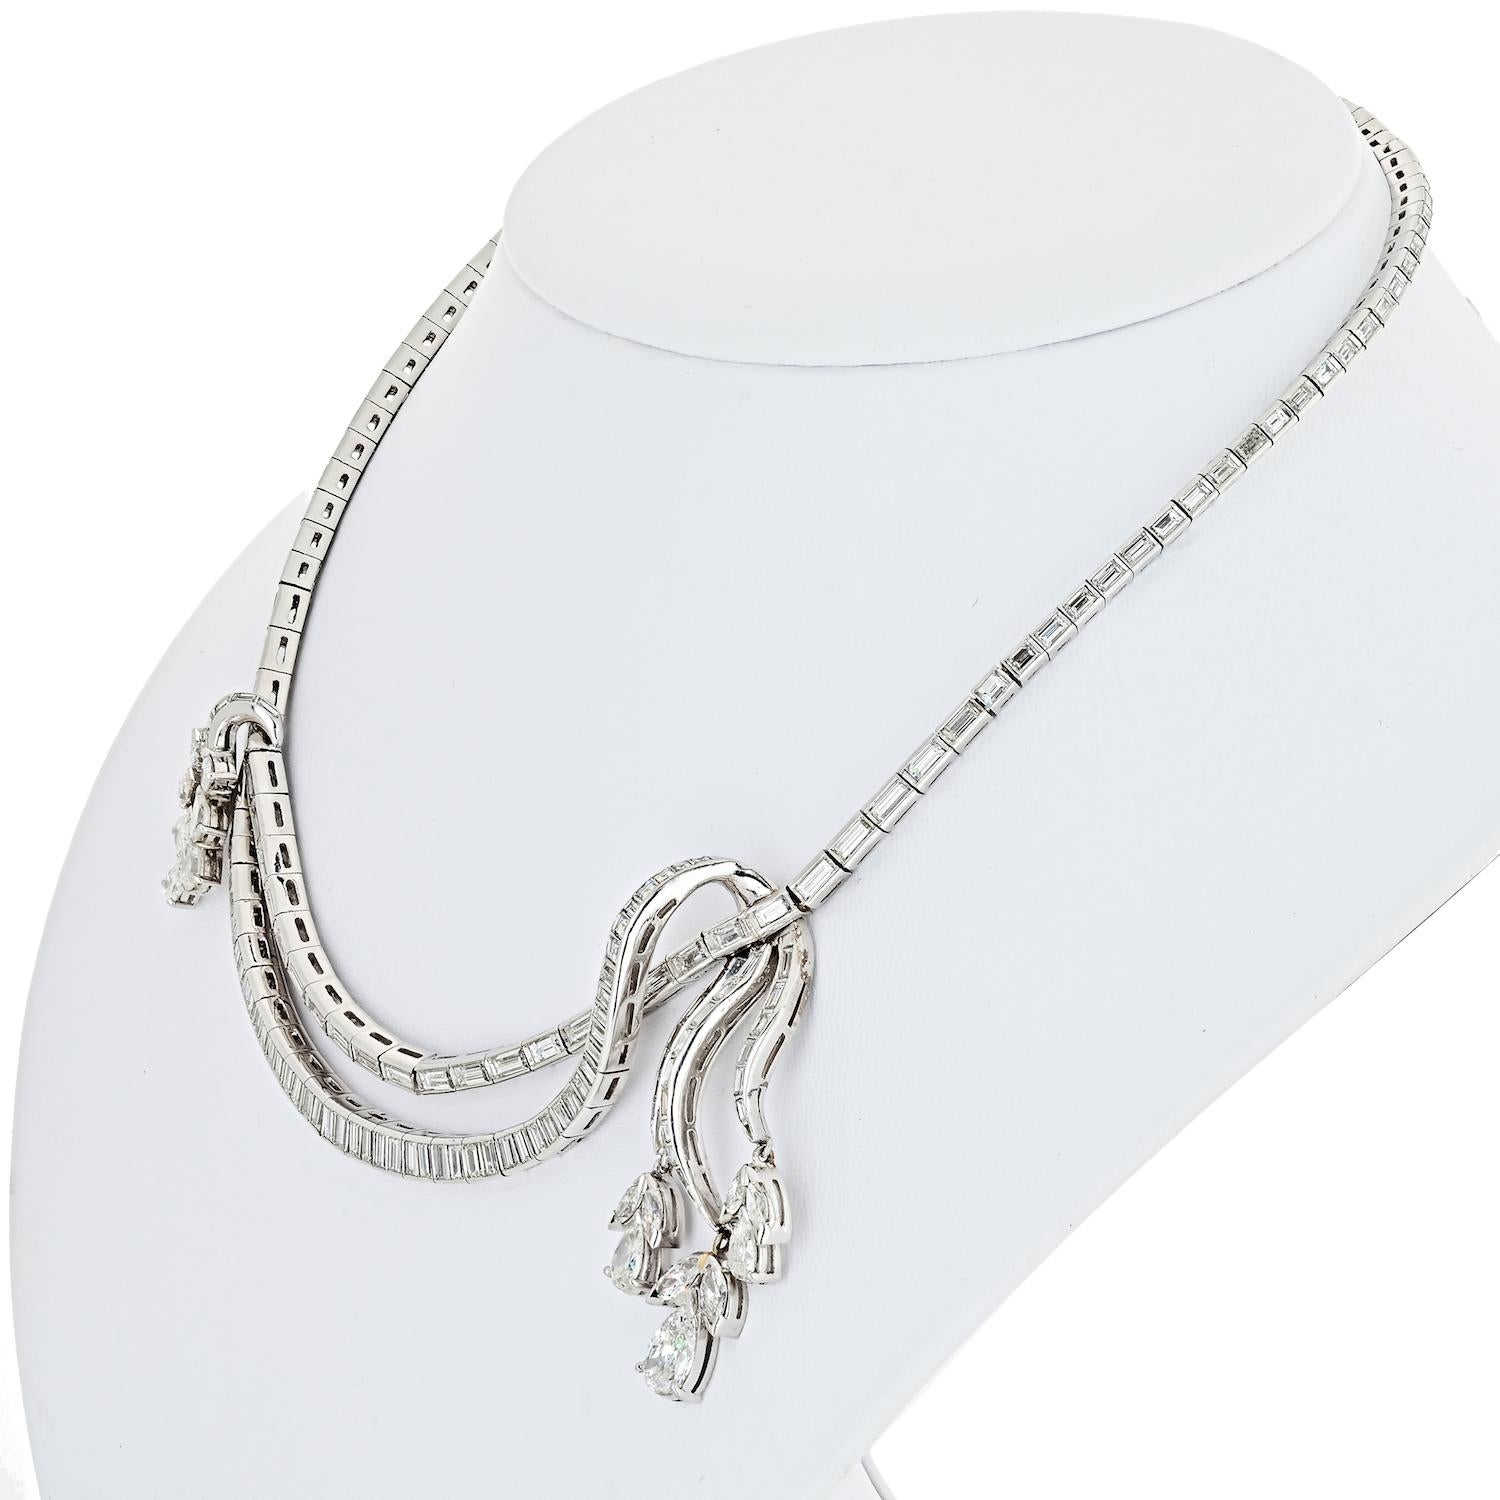 Extravagance is the single word that describes the lustrous Art Deco time period. Abstract designs of geometric shapes are intellectually fused together to create fascinating designs. This quintessential dazzling necklace is crafted in platinum and